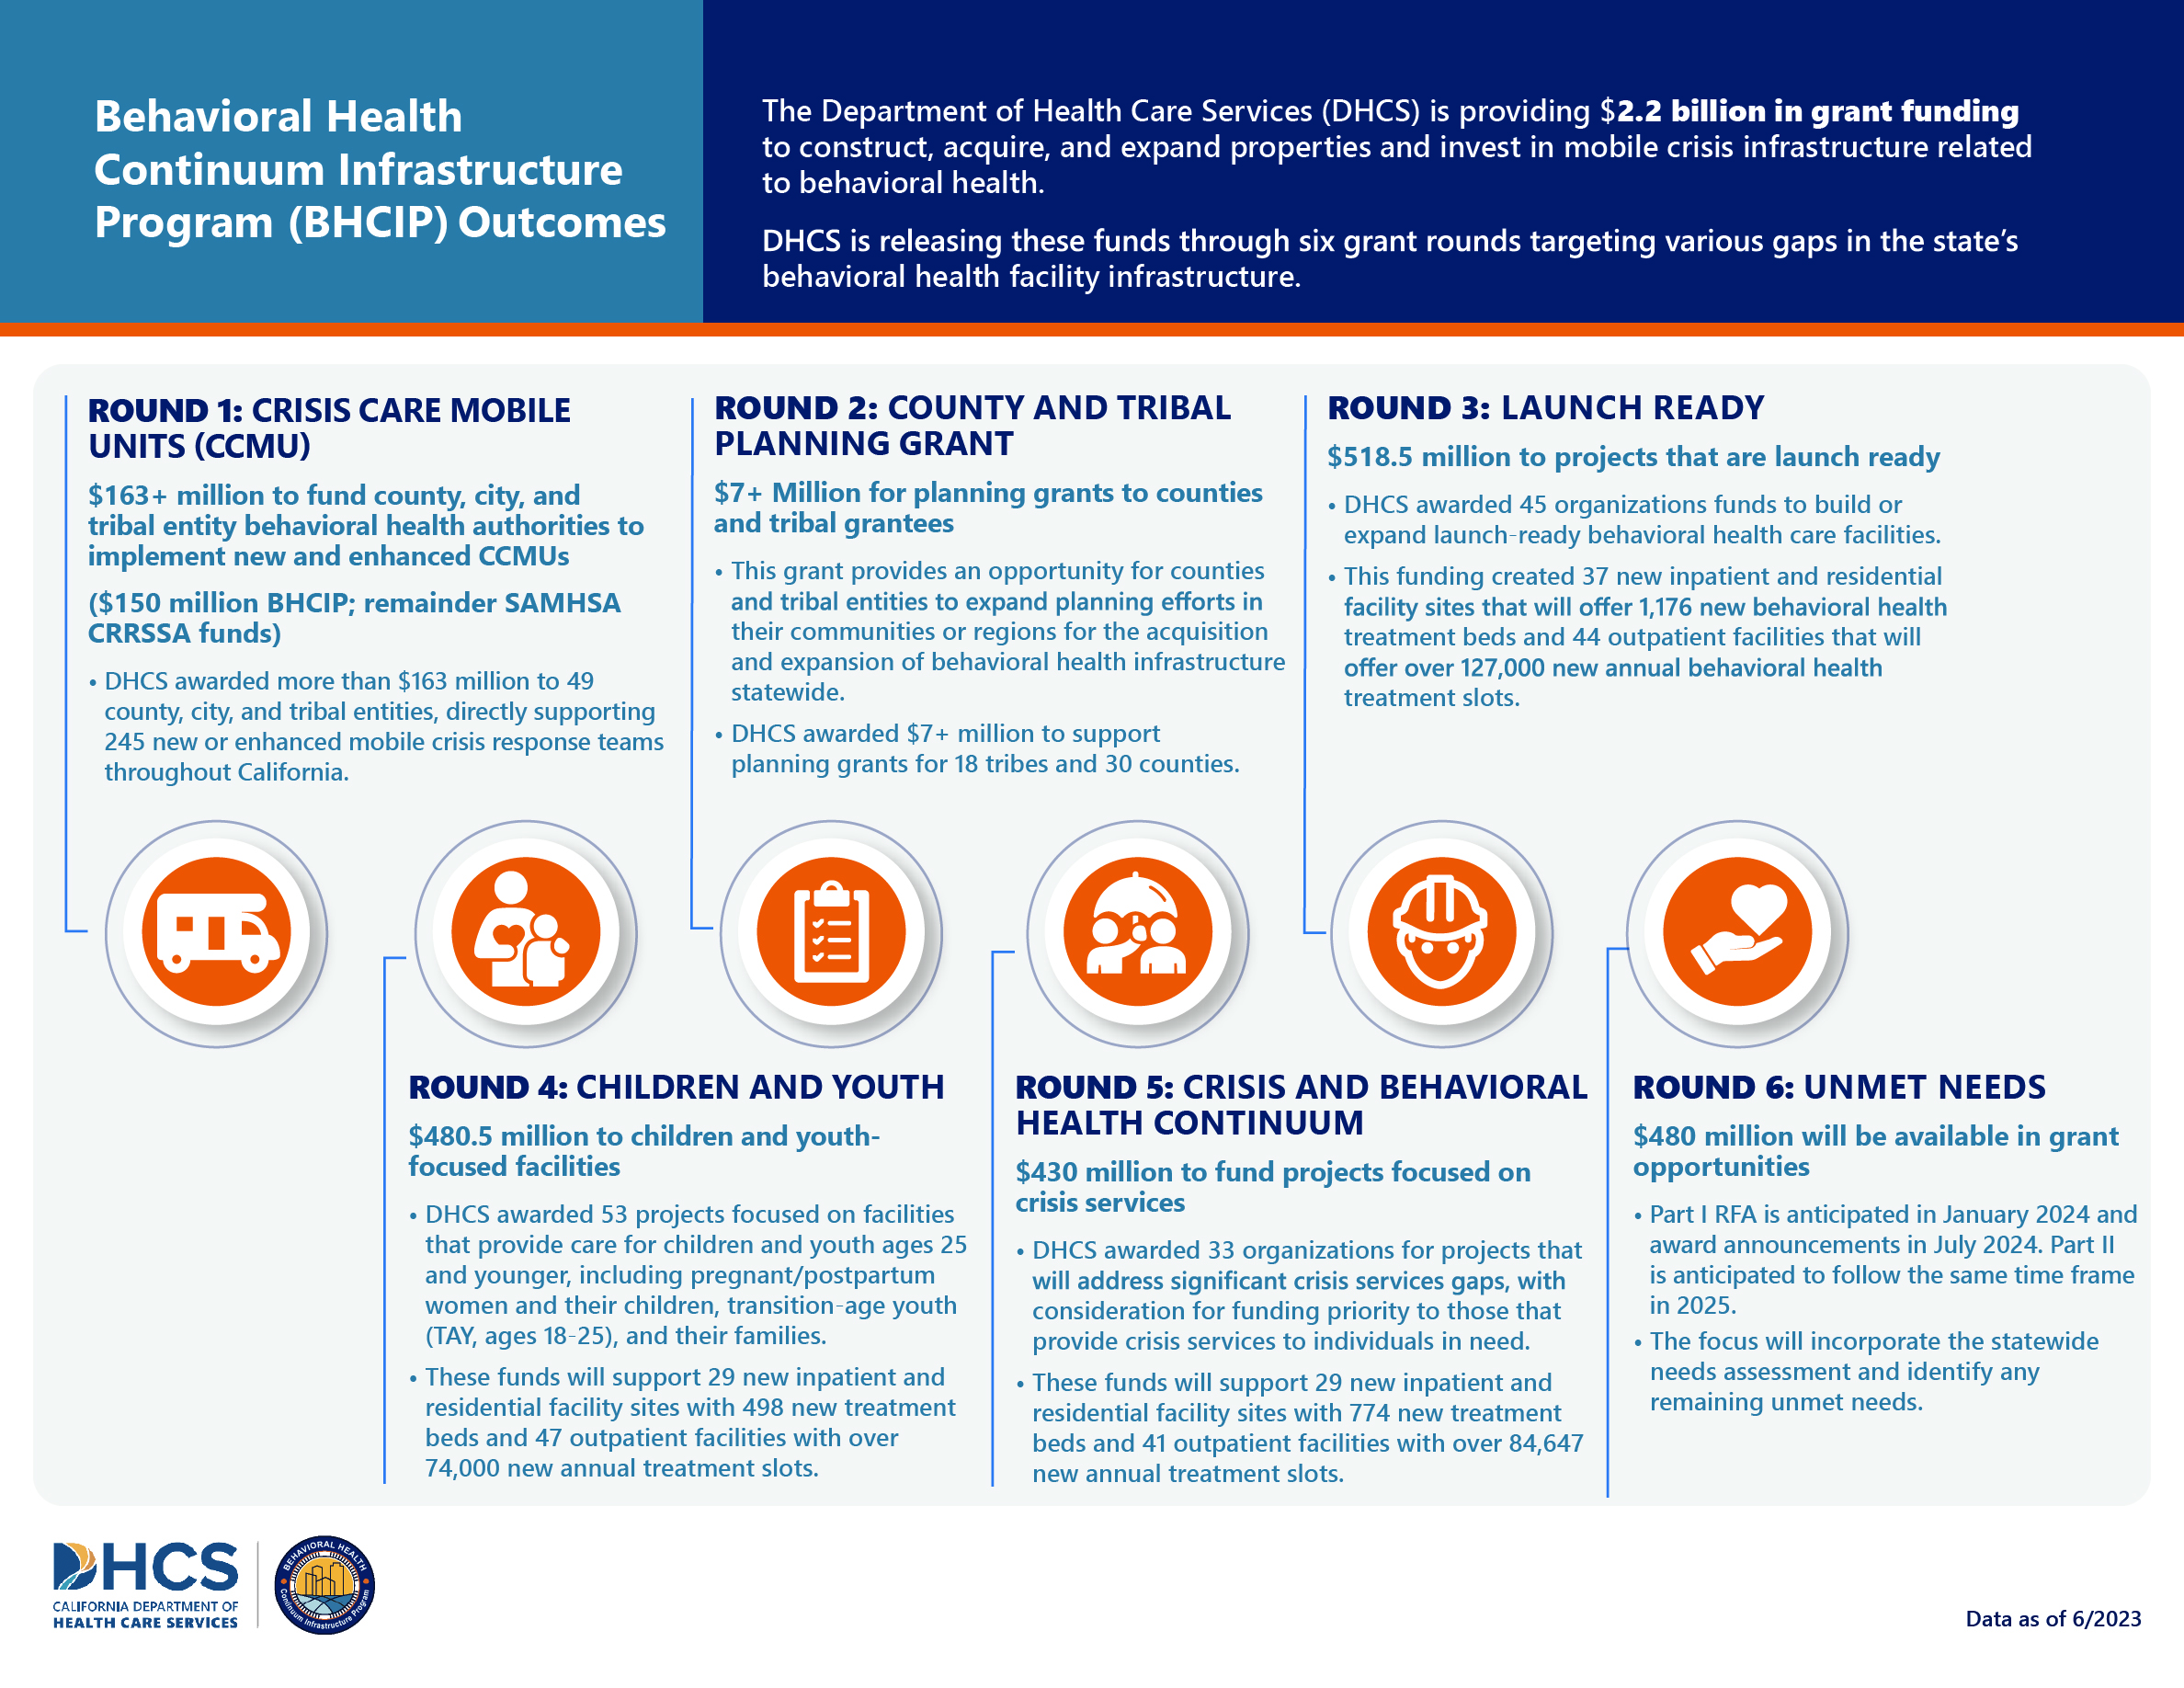 The Department of Health Care Services (DHCS) Outcomes Infographic